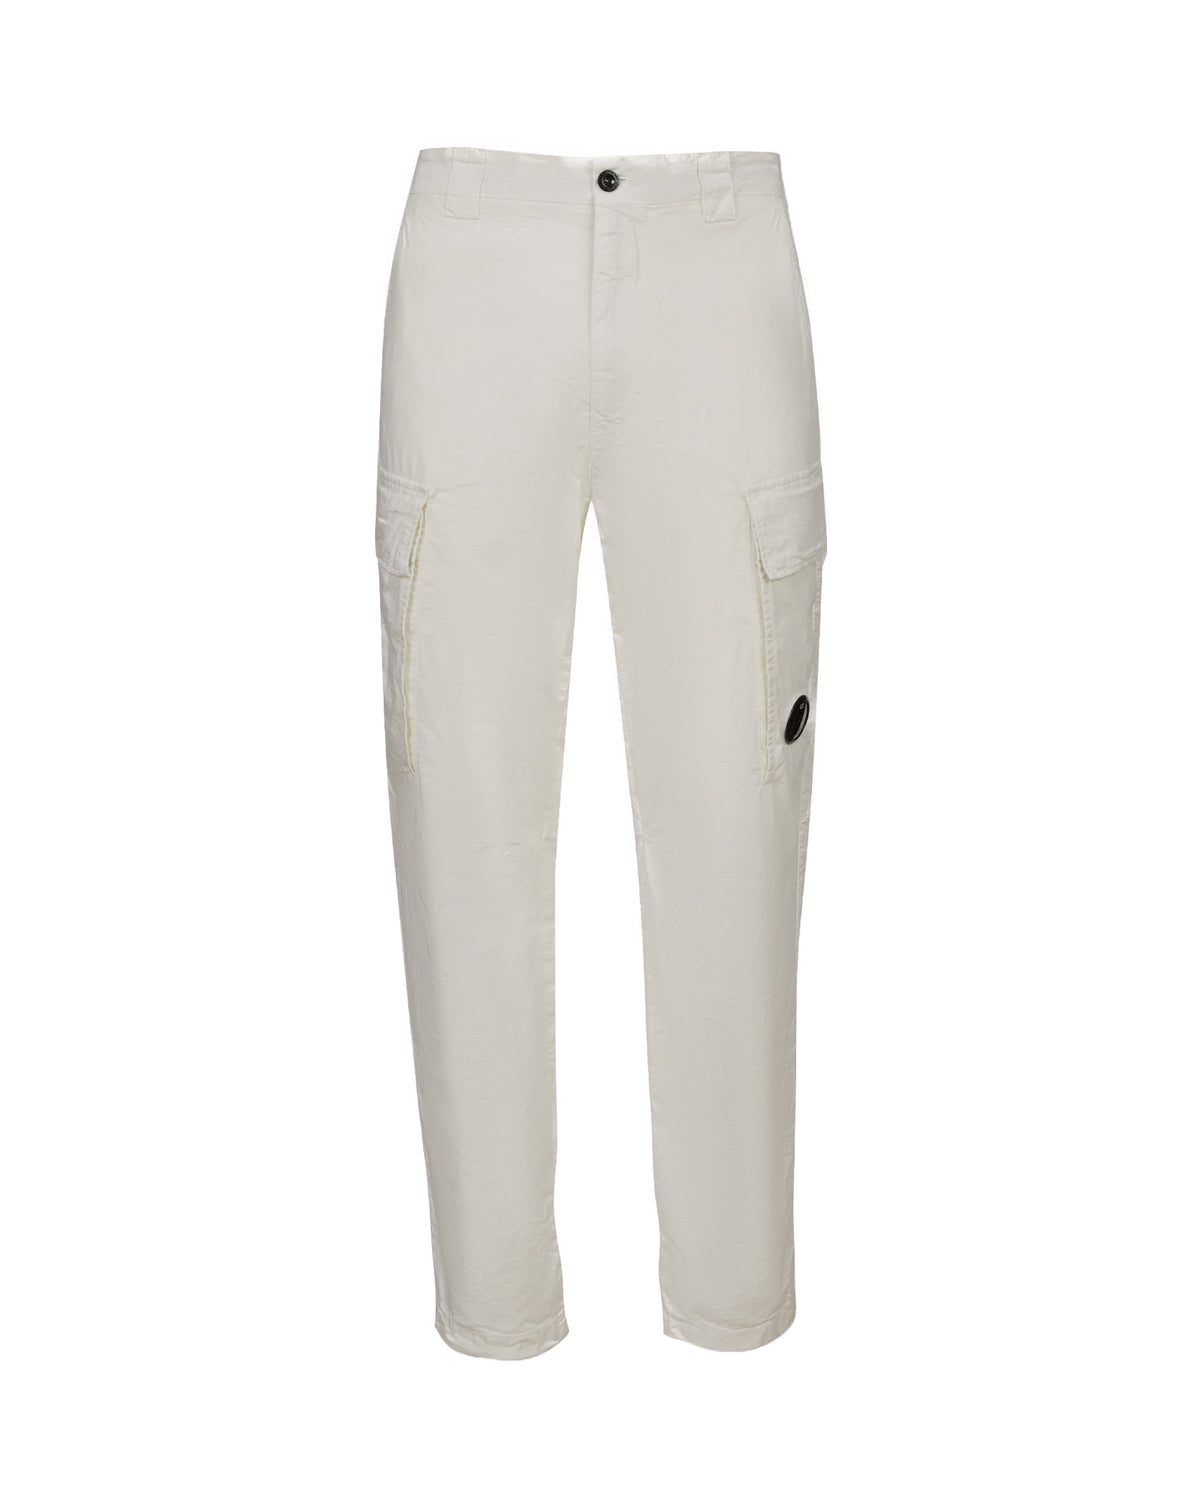 CP Company Twill Stretch Cargo Pants White